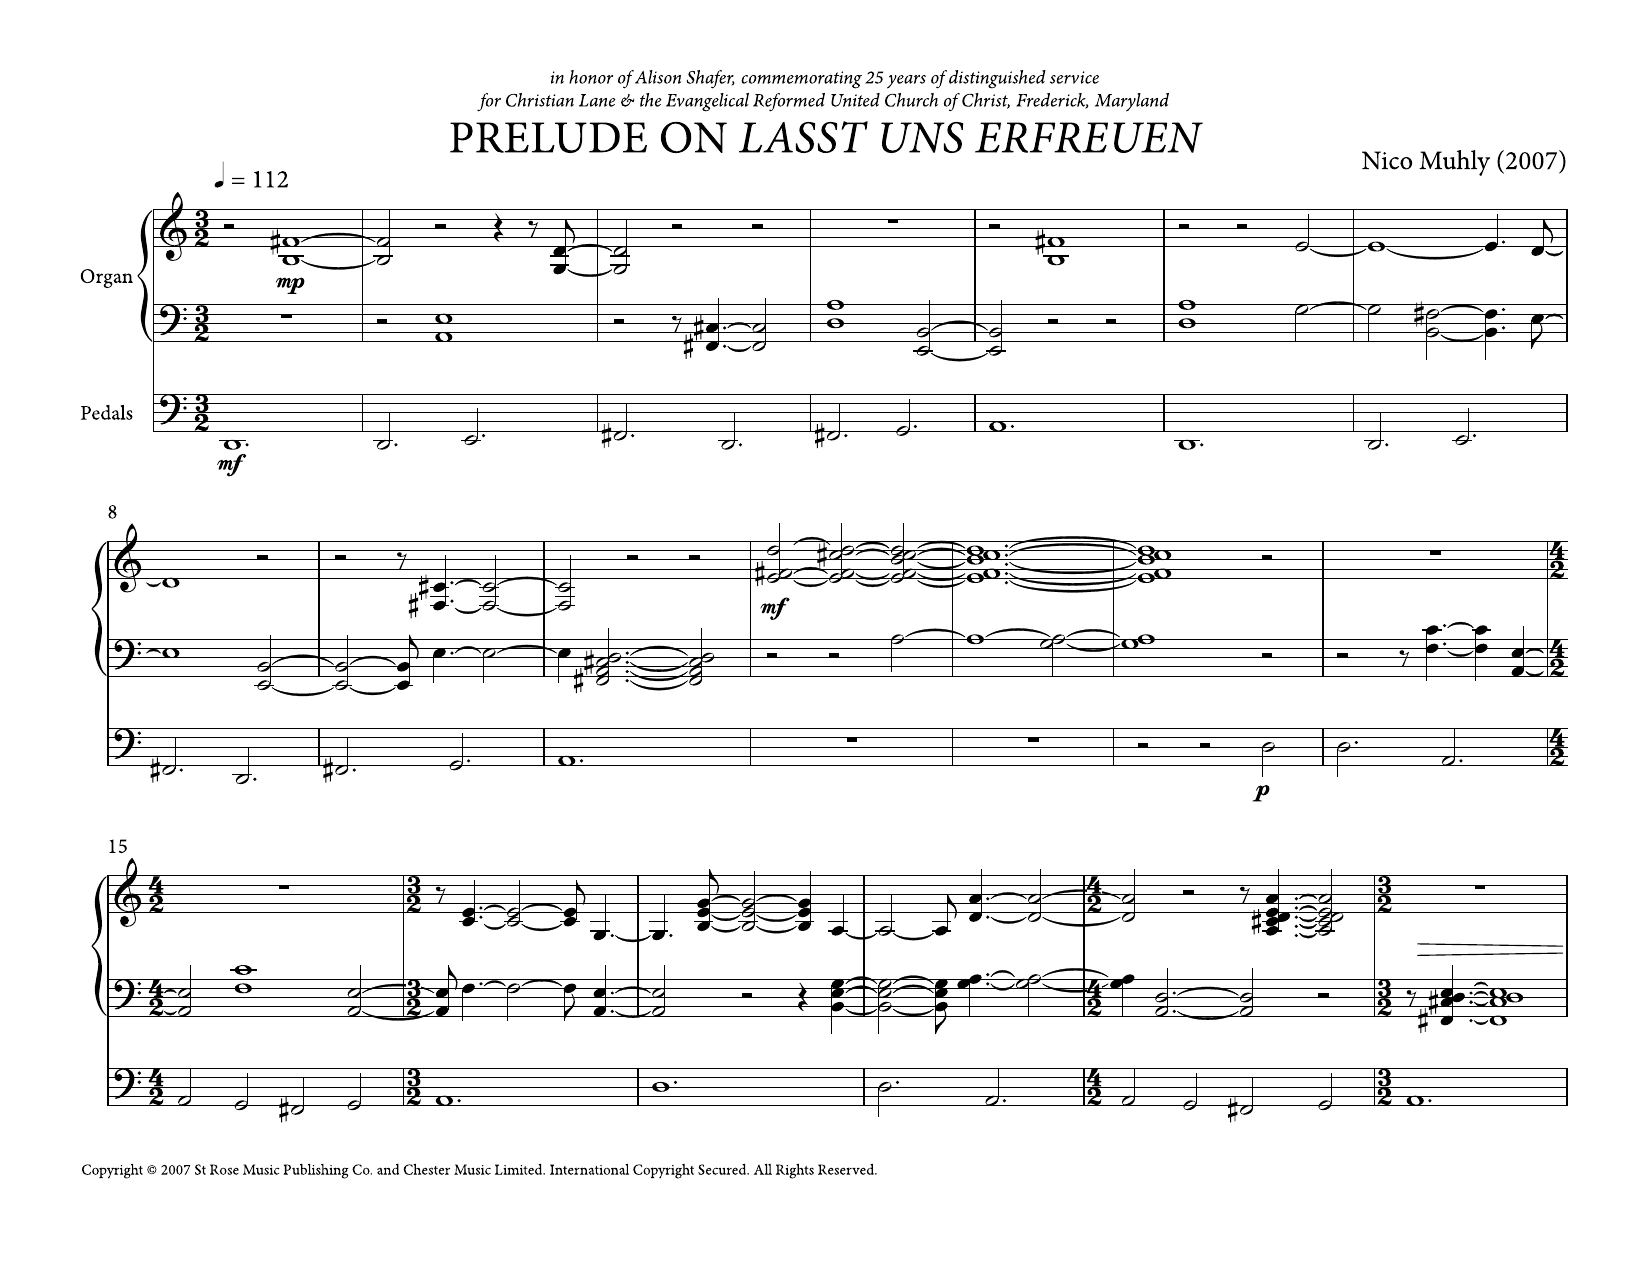 Download Nico Muhly Prelude On Lasst Uns Erfreuen Sheet Music